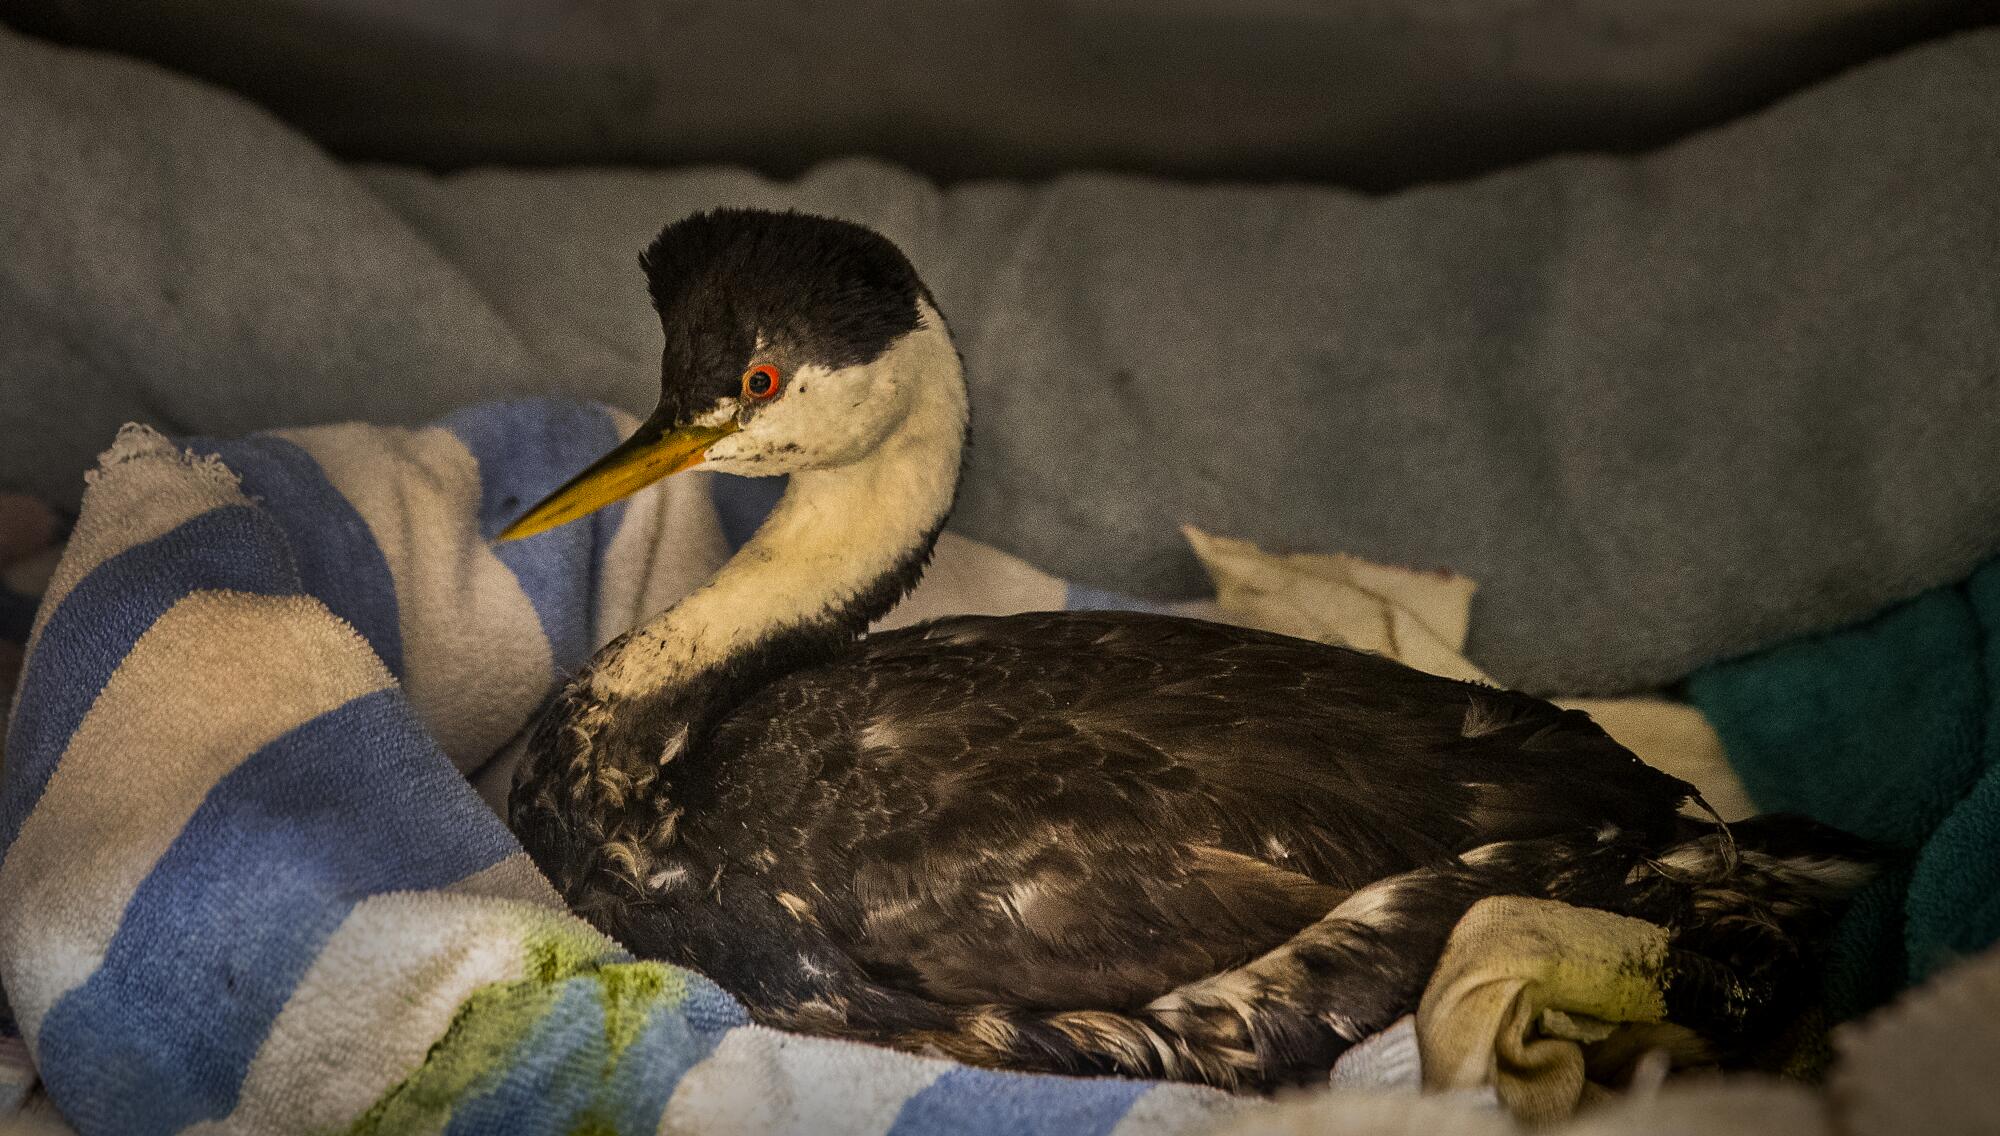 An oiled western grebe sits on a towel in its cage.